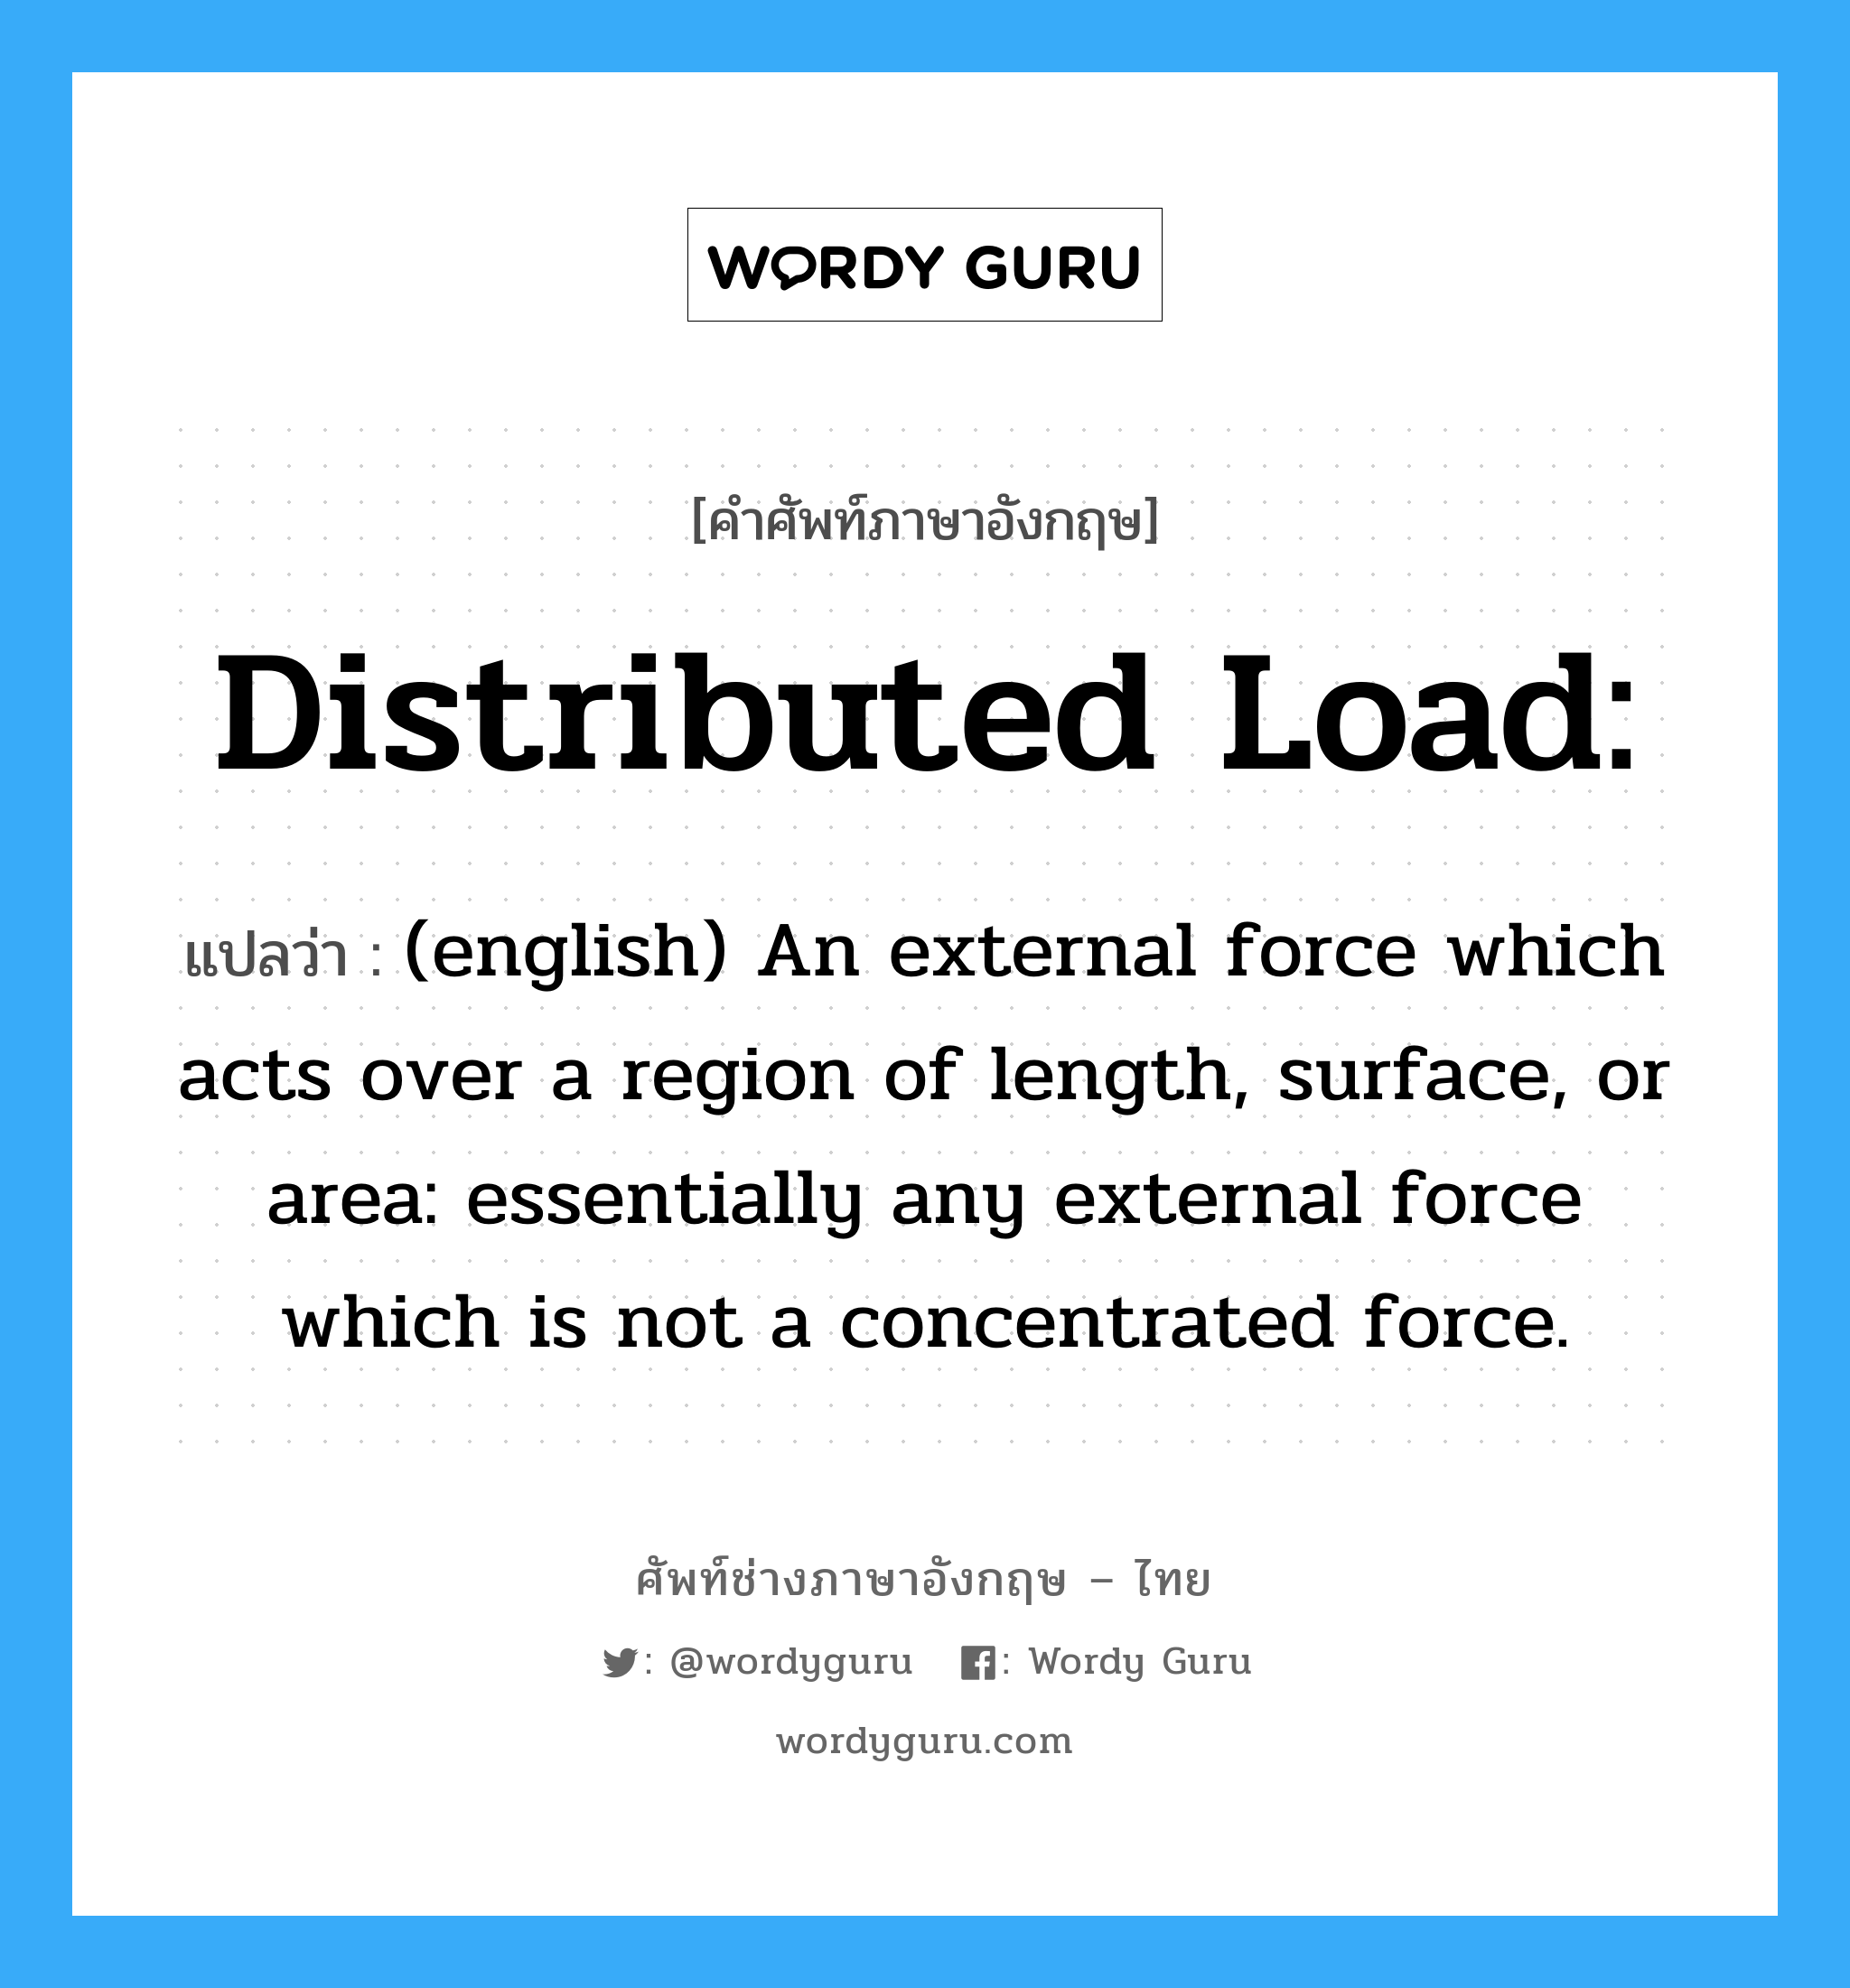 Distributed load: แปลว่า?, คำศัพท์ช่างภาษาอังกฤษ - ไทย Distributed load: คำศัพท์ภาษาอังกฤษ Distributed load: แปลว่า (english) An external force which acts over a region of length, surface, or area: essentially any external force which is not a concentrated force.